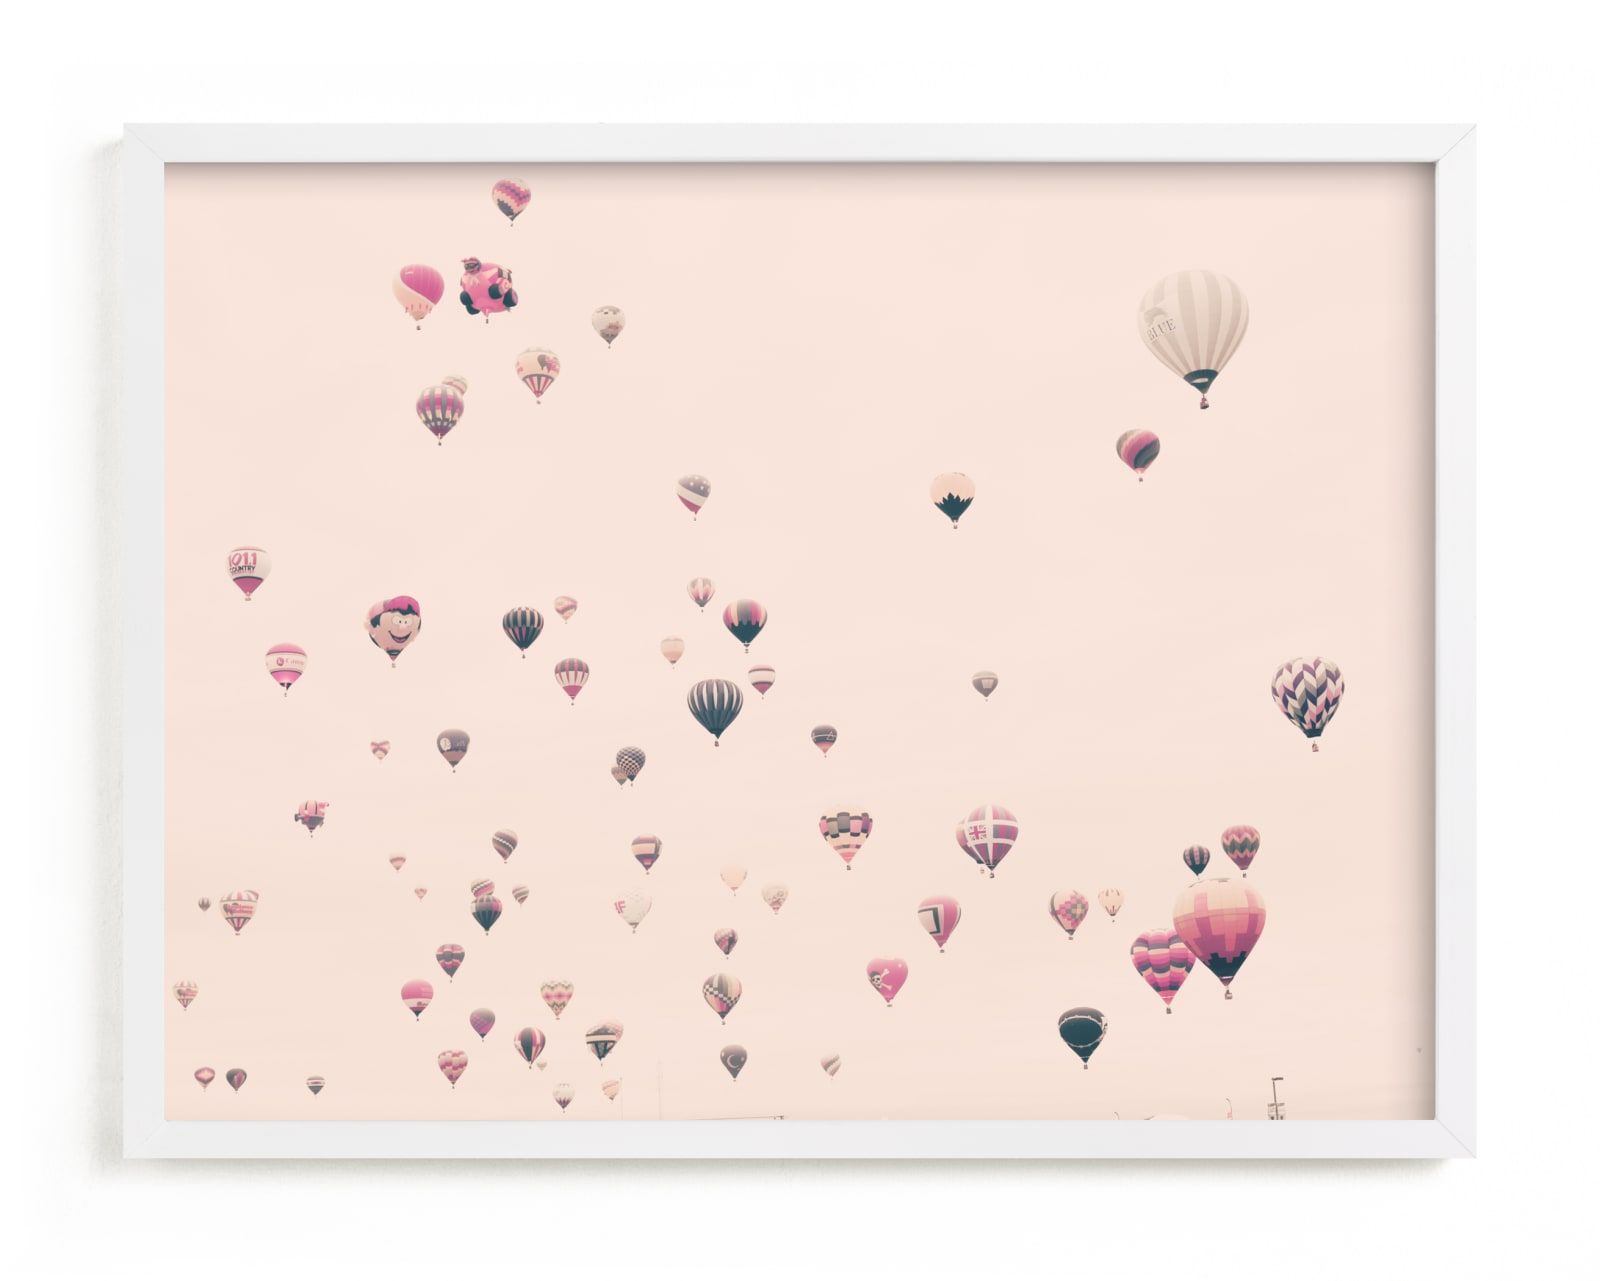 "Love is all around" - Photography Limited Edition Art Print by Caroline Mint. | Minted